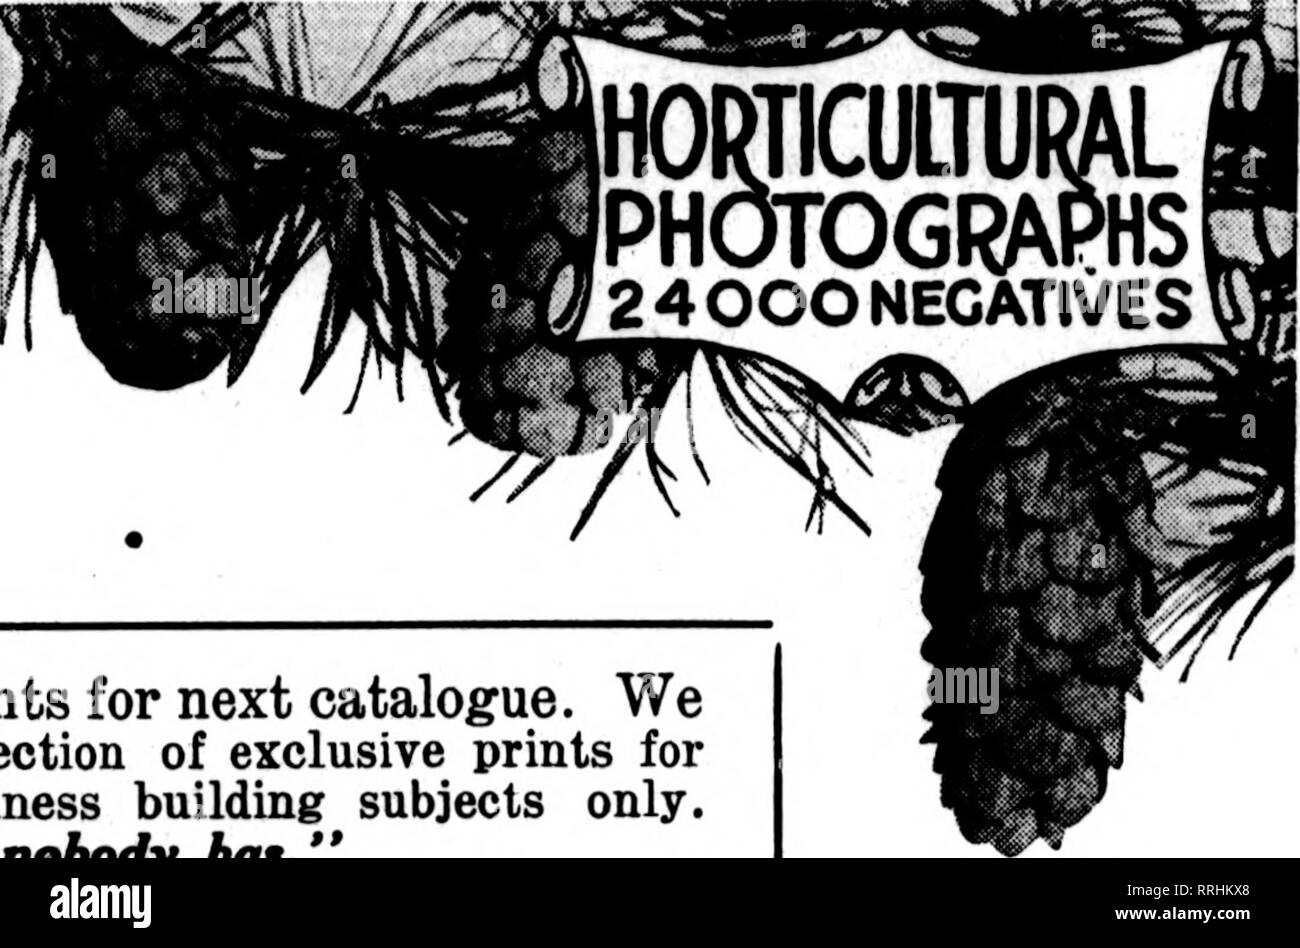 . Florists' review [microform]. Floriculture. Febbuaby 13, 1919. The Florists^ Review 87 PINUS MUGHO {Dwt. Mt.Plae) Tnnh Per 100 4-8 Bedded stock I tr $7.00 fi-io Field-GrownStock2 tr 15.00 in-l2 Field-Grown Stock 2 tr 20.00 12-18 Field-Grown Stock 2 tr 25.00 18-24 Field-Grown Stock 2 tr 85.00 Feet Per 10 1 -l^a Specimens B. &amp; B. 3 tr $ 9.60 lifl-2 Specimens B. &amp; B. 3 tr 16.00 TAXUS CANADENSIS (American Yew) Inch Per 100 6-15 Bedded Stock 1 tr $ 6.00 10-12 Field-Grown Stock 2 tr 16.00 Feet Per 10 1 -II3 Specimens B. &amp; B. 3 tr $20.00 l»3-2 Specimens B. A B. 3 tr 30.00 Nice, thrifty, Stock Photo